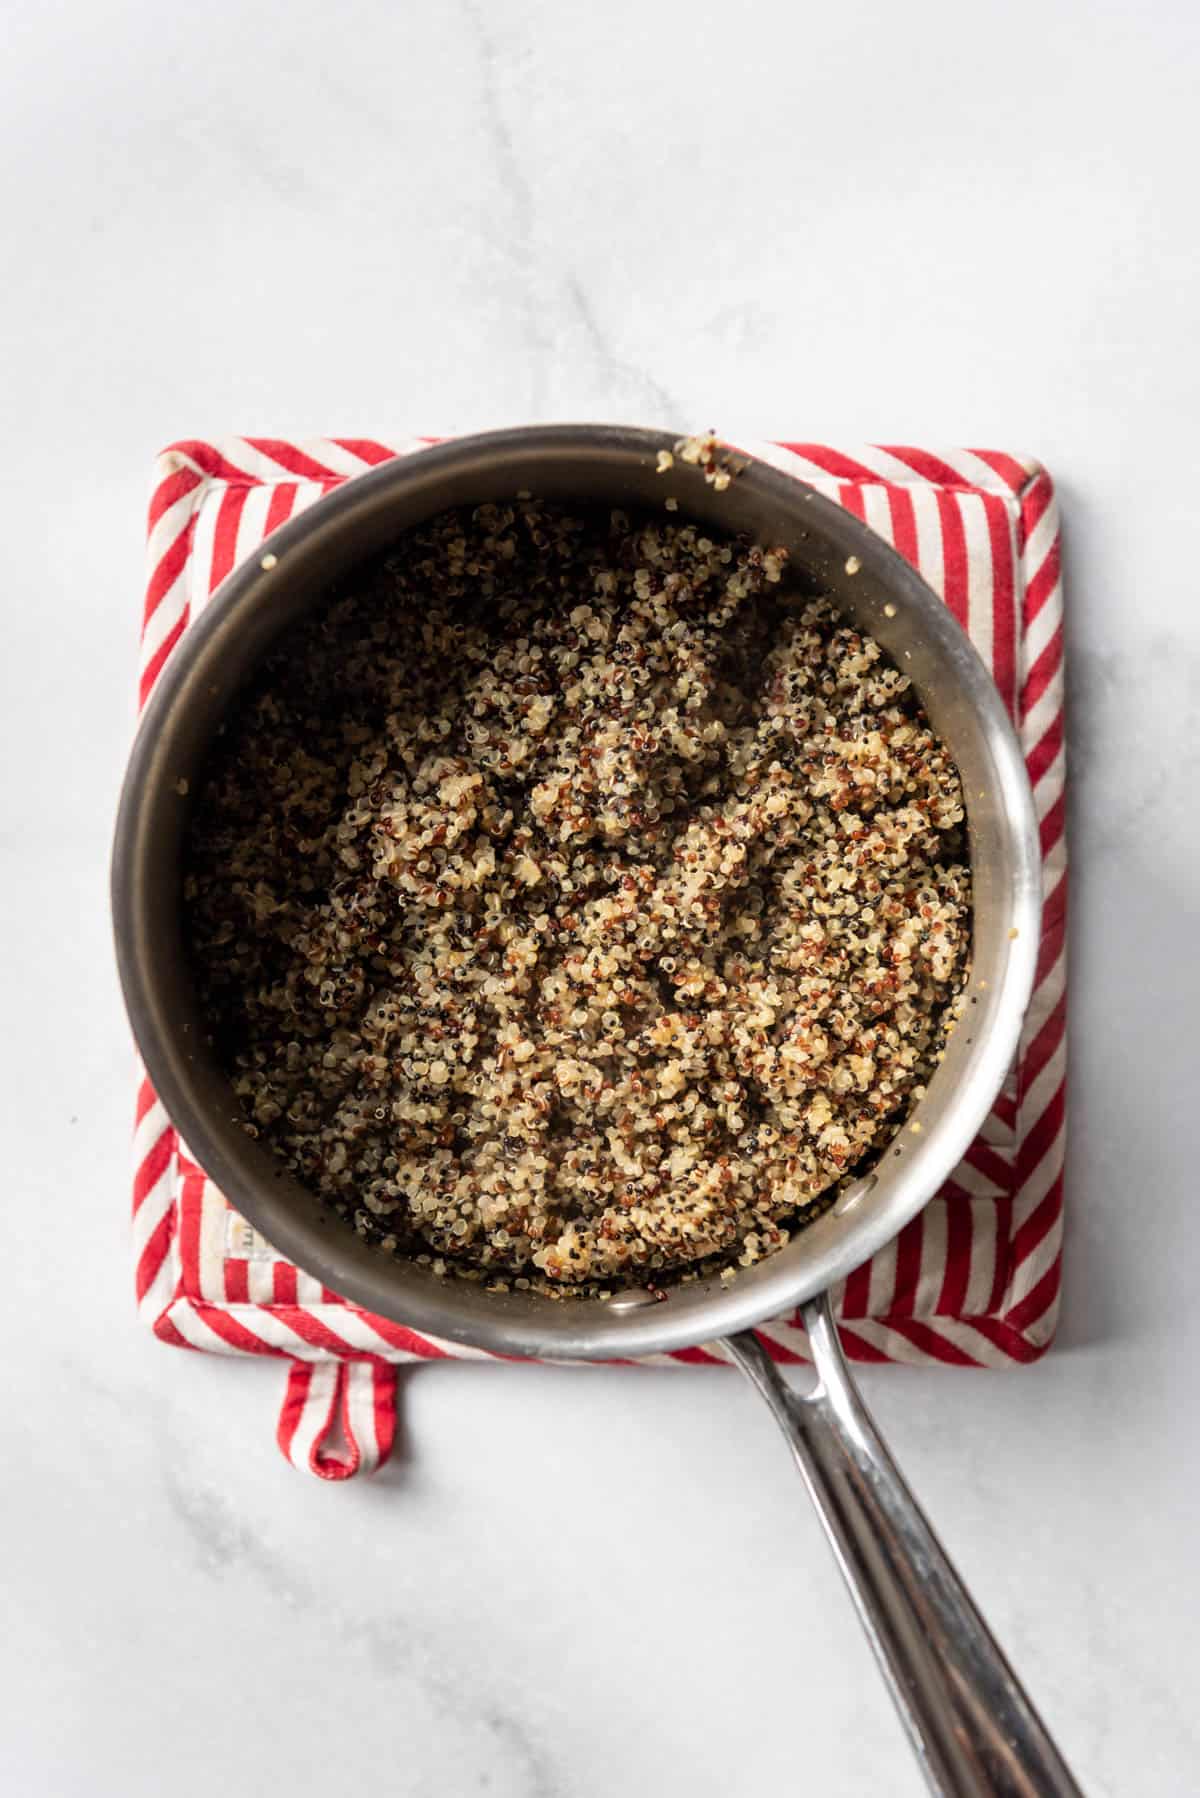 A pot of cooked quinoa on a striped hot pad.